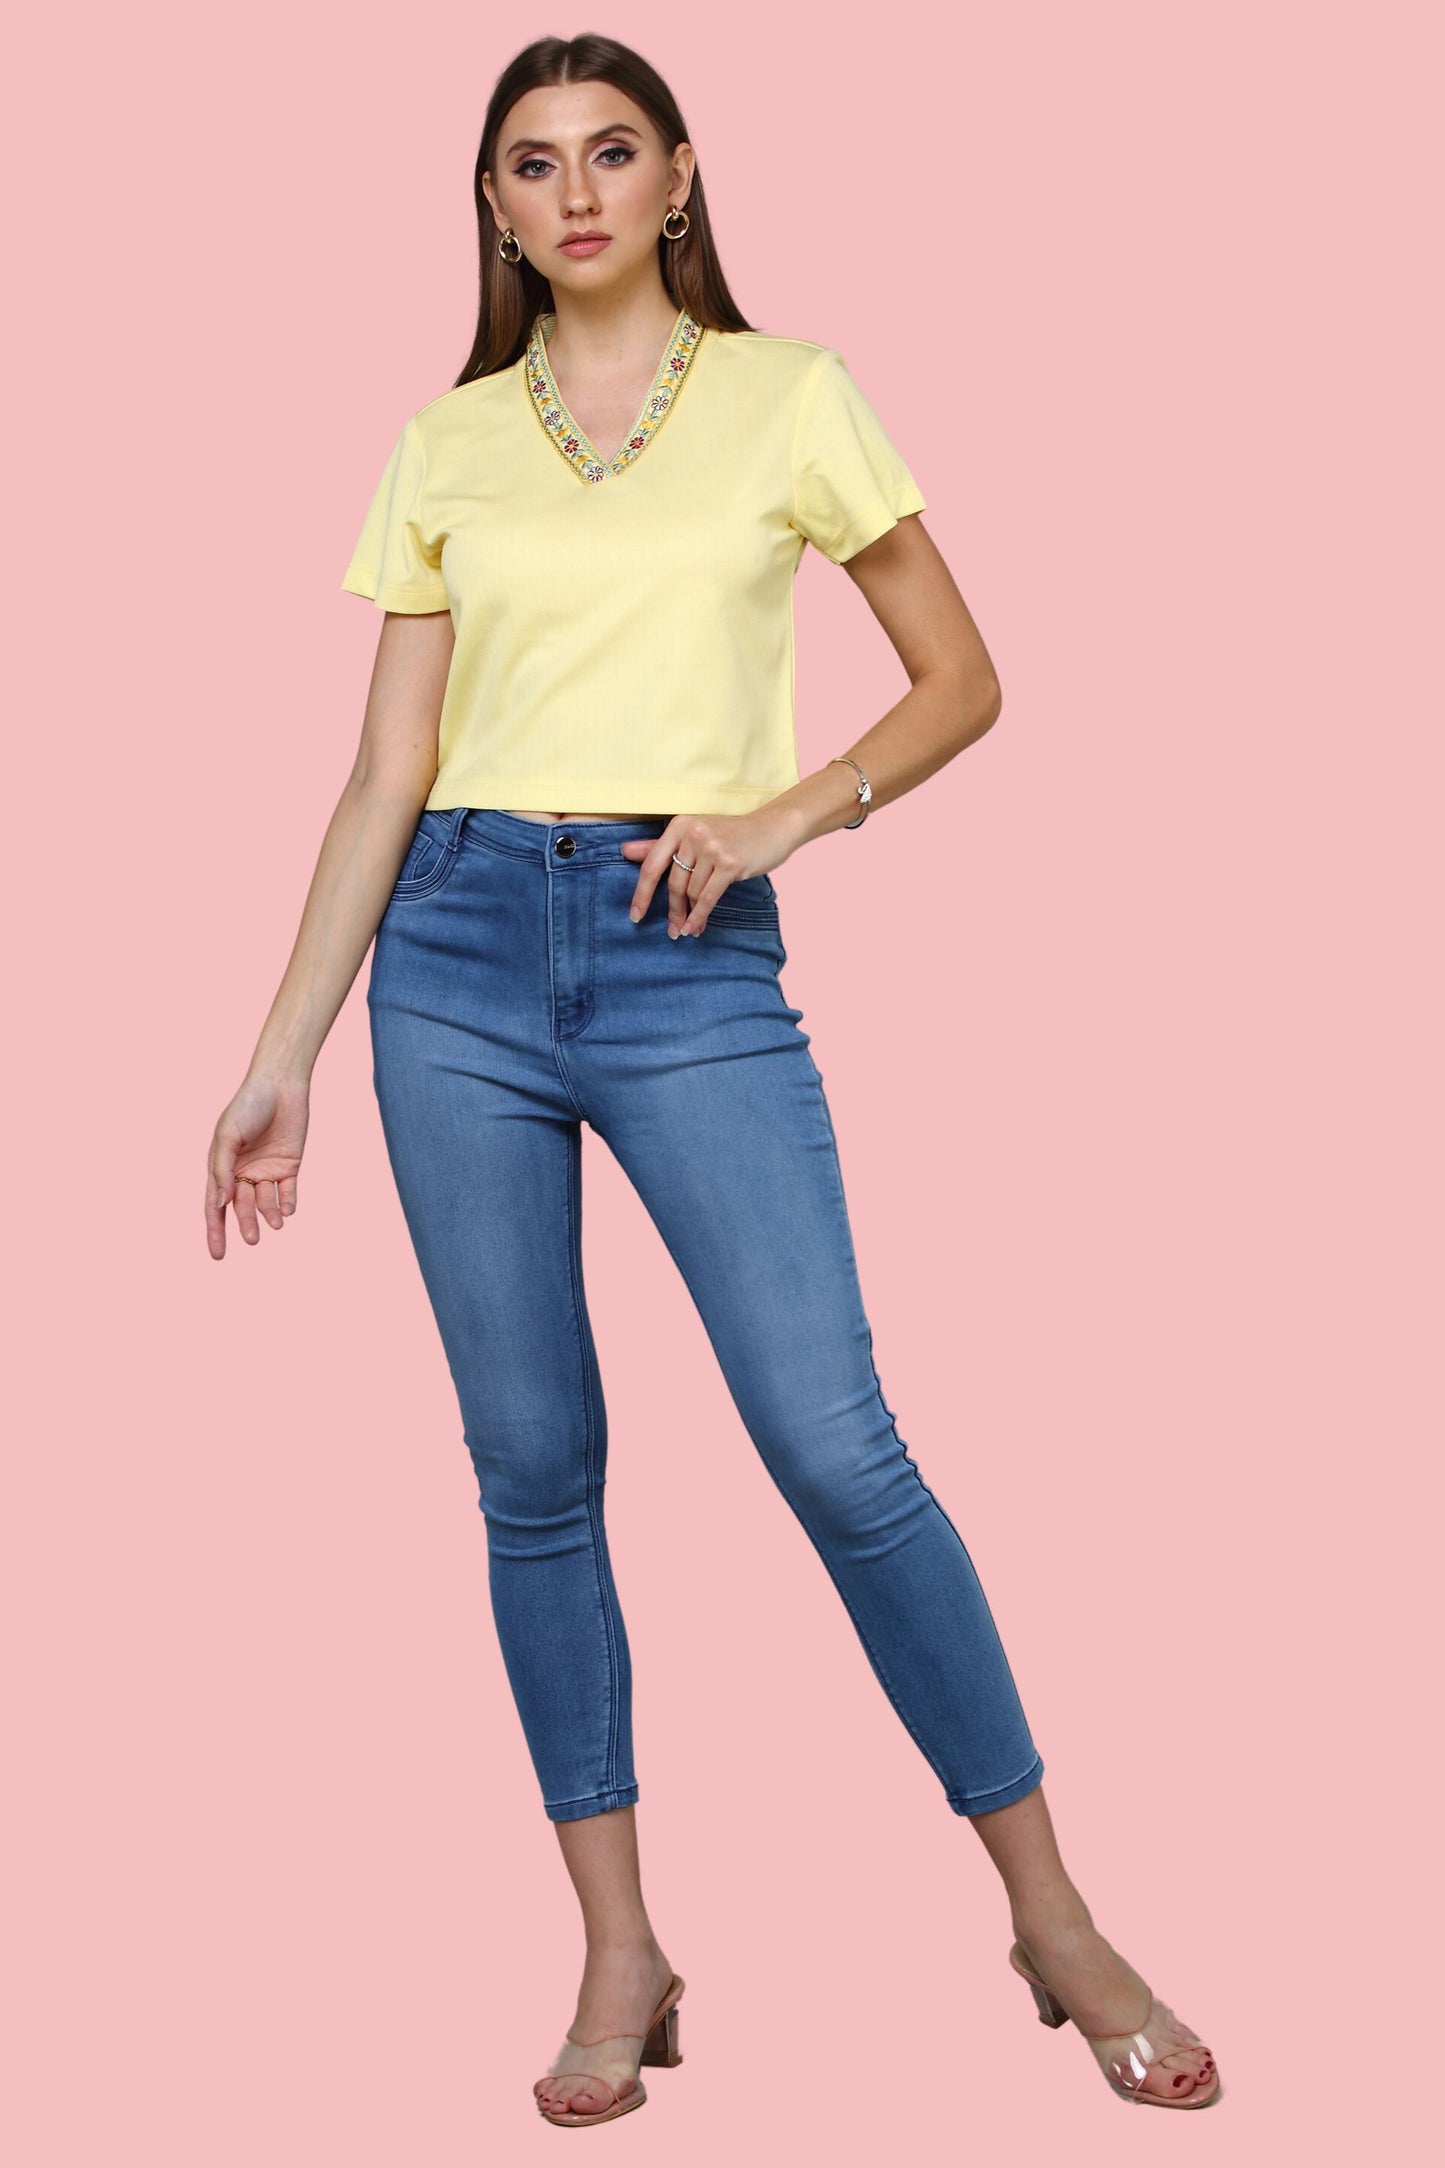 Short Sleeved Embroidered Yellow Top